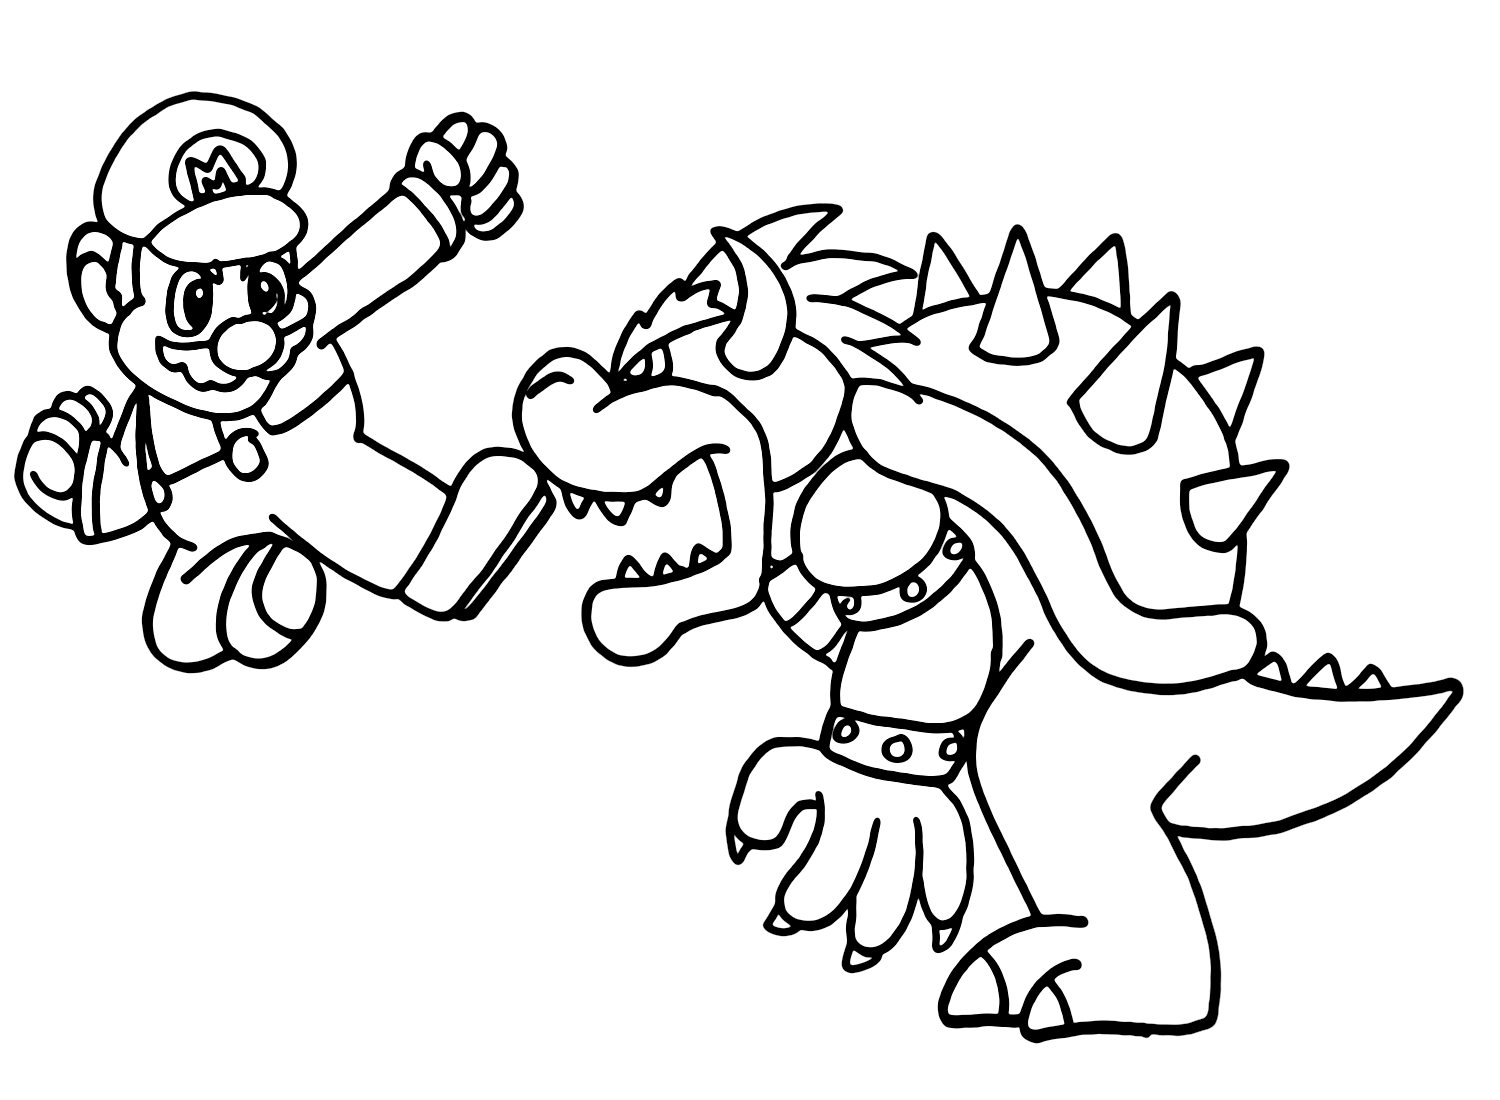 Bowser with Mario Coloring Pages